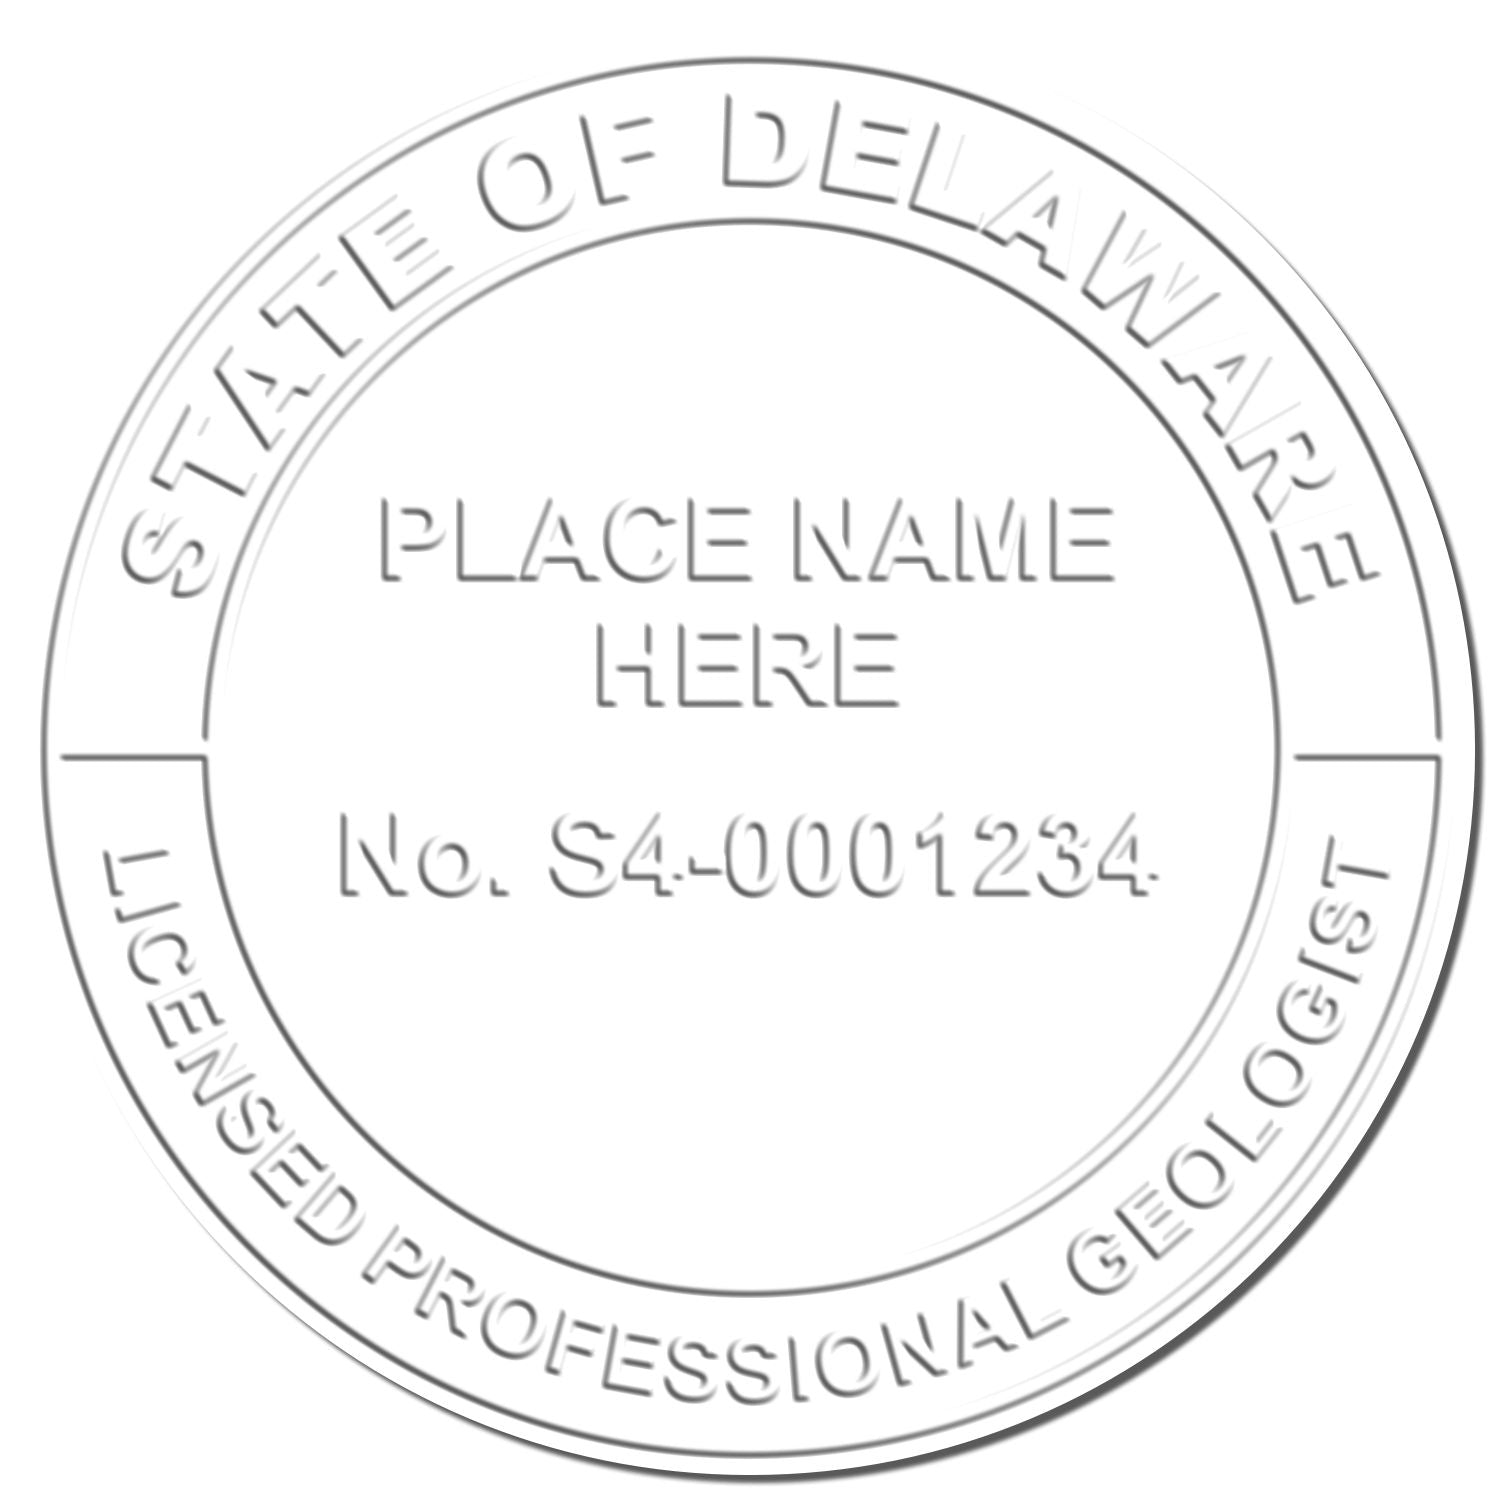 The Delaware Geologist Desk Seal stamp impression comes to life with a crisp, detailed image stamped on paper - showcasing true professional quality.